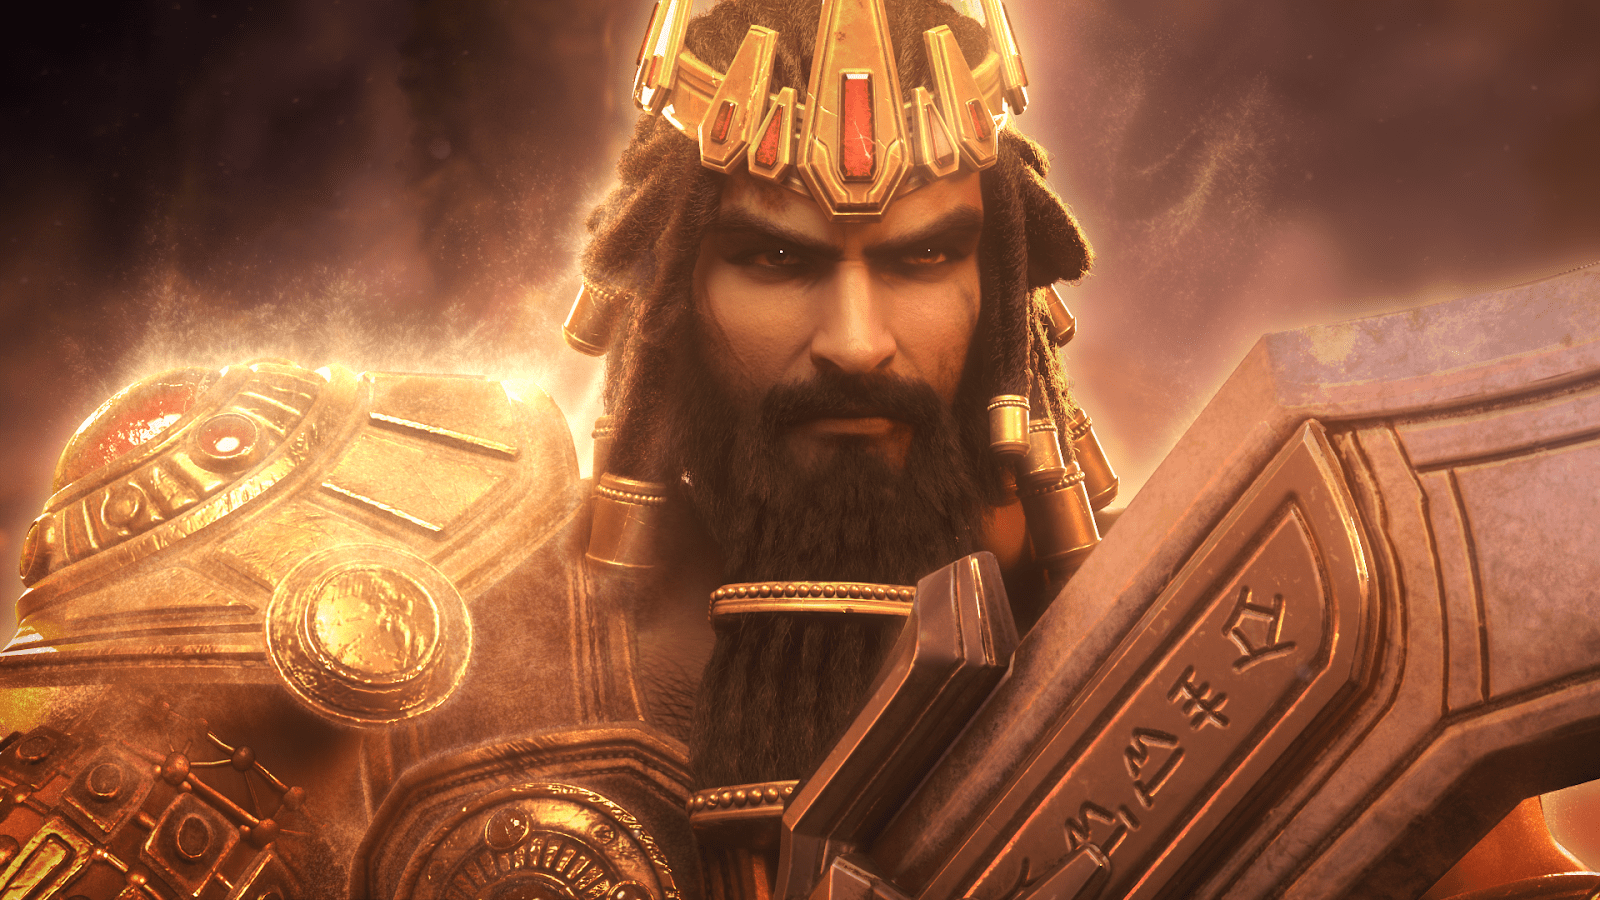 SMITE Gilgamesh Cinematic Trailer Features the New God Coming April 20